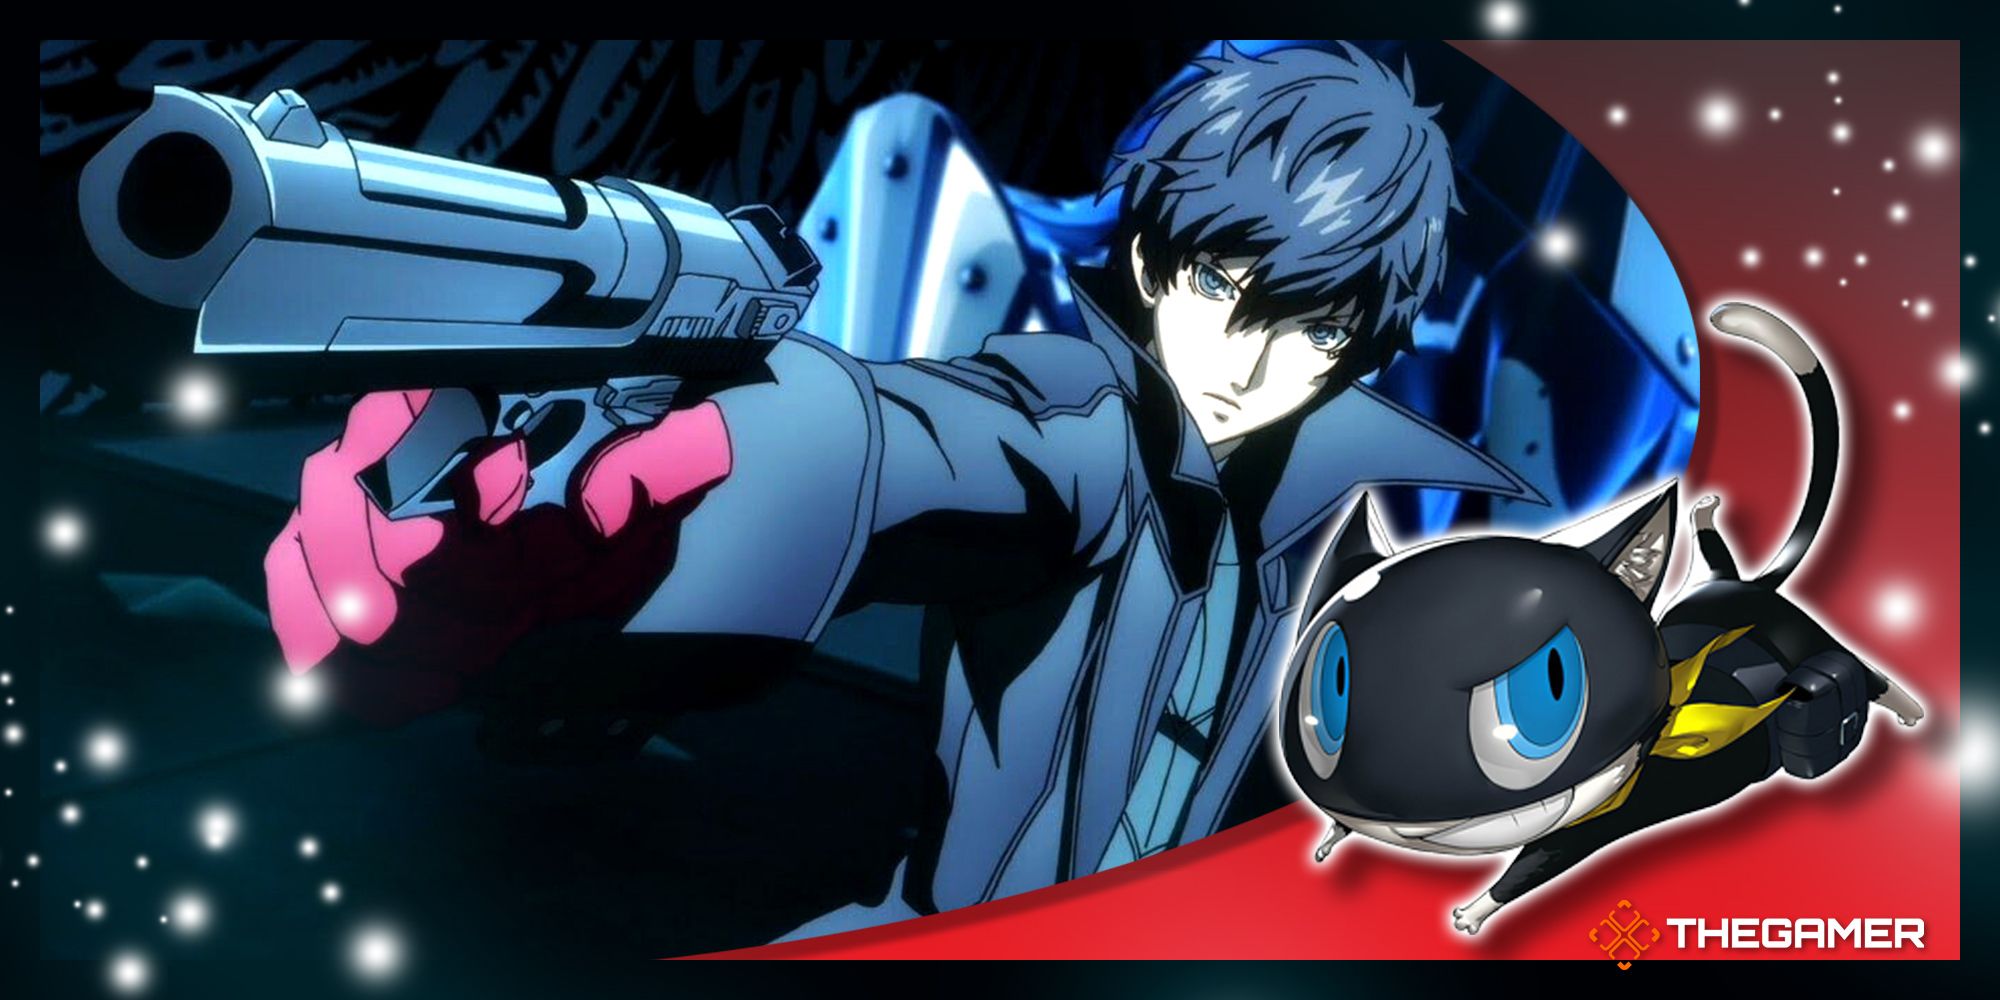 joker from the persona 5 royal anime pointing his gun in our red morgana p5r frame